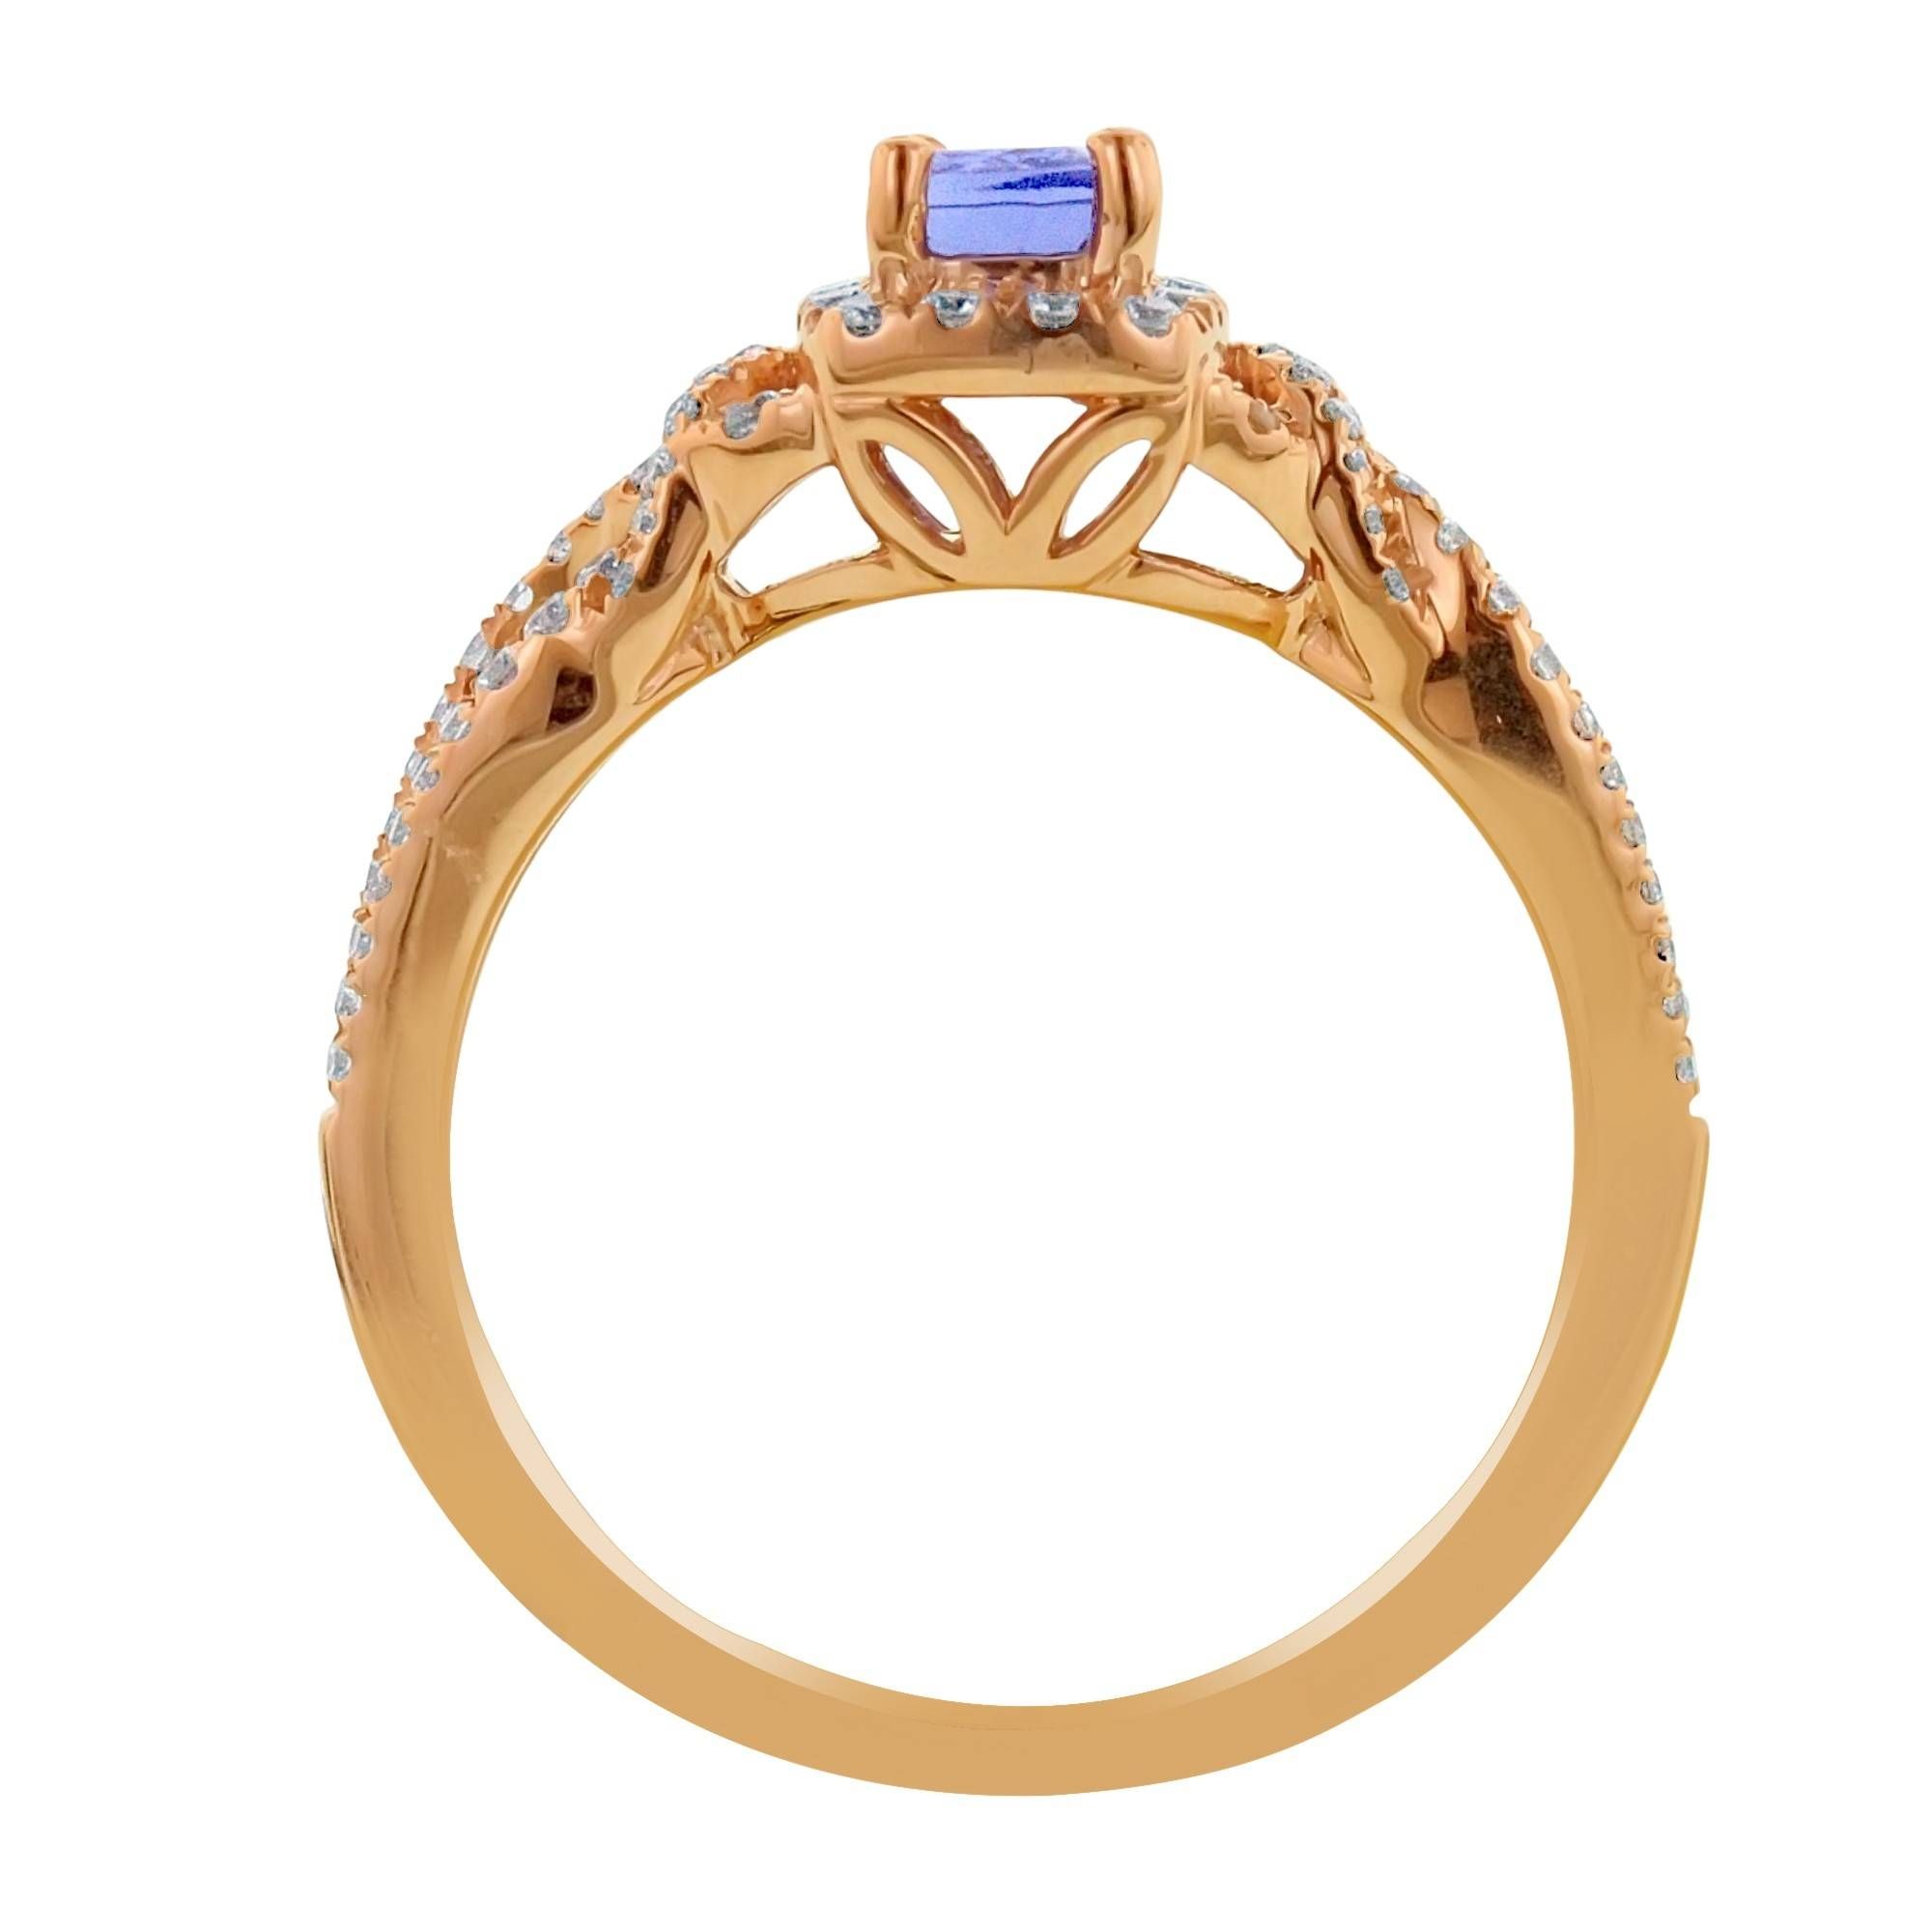 Le Vian Blueberry Tanzanite And Vanilla Diamond Ring In 14kt With Strawberry Gold Wedding Rings (View 10 of 15)